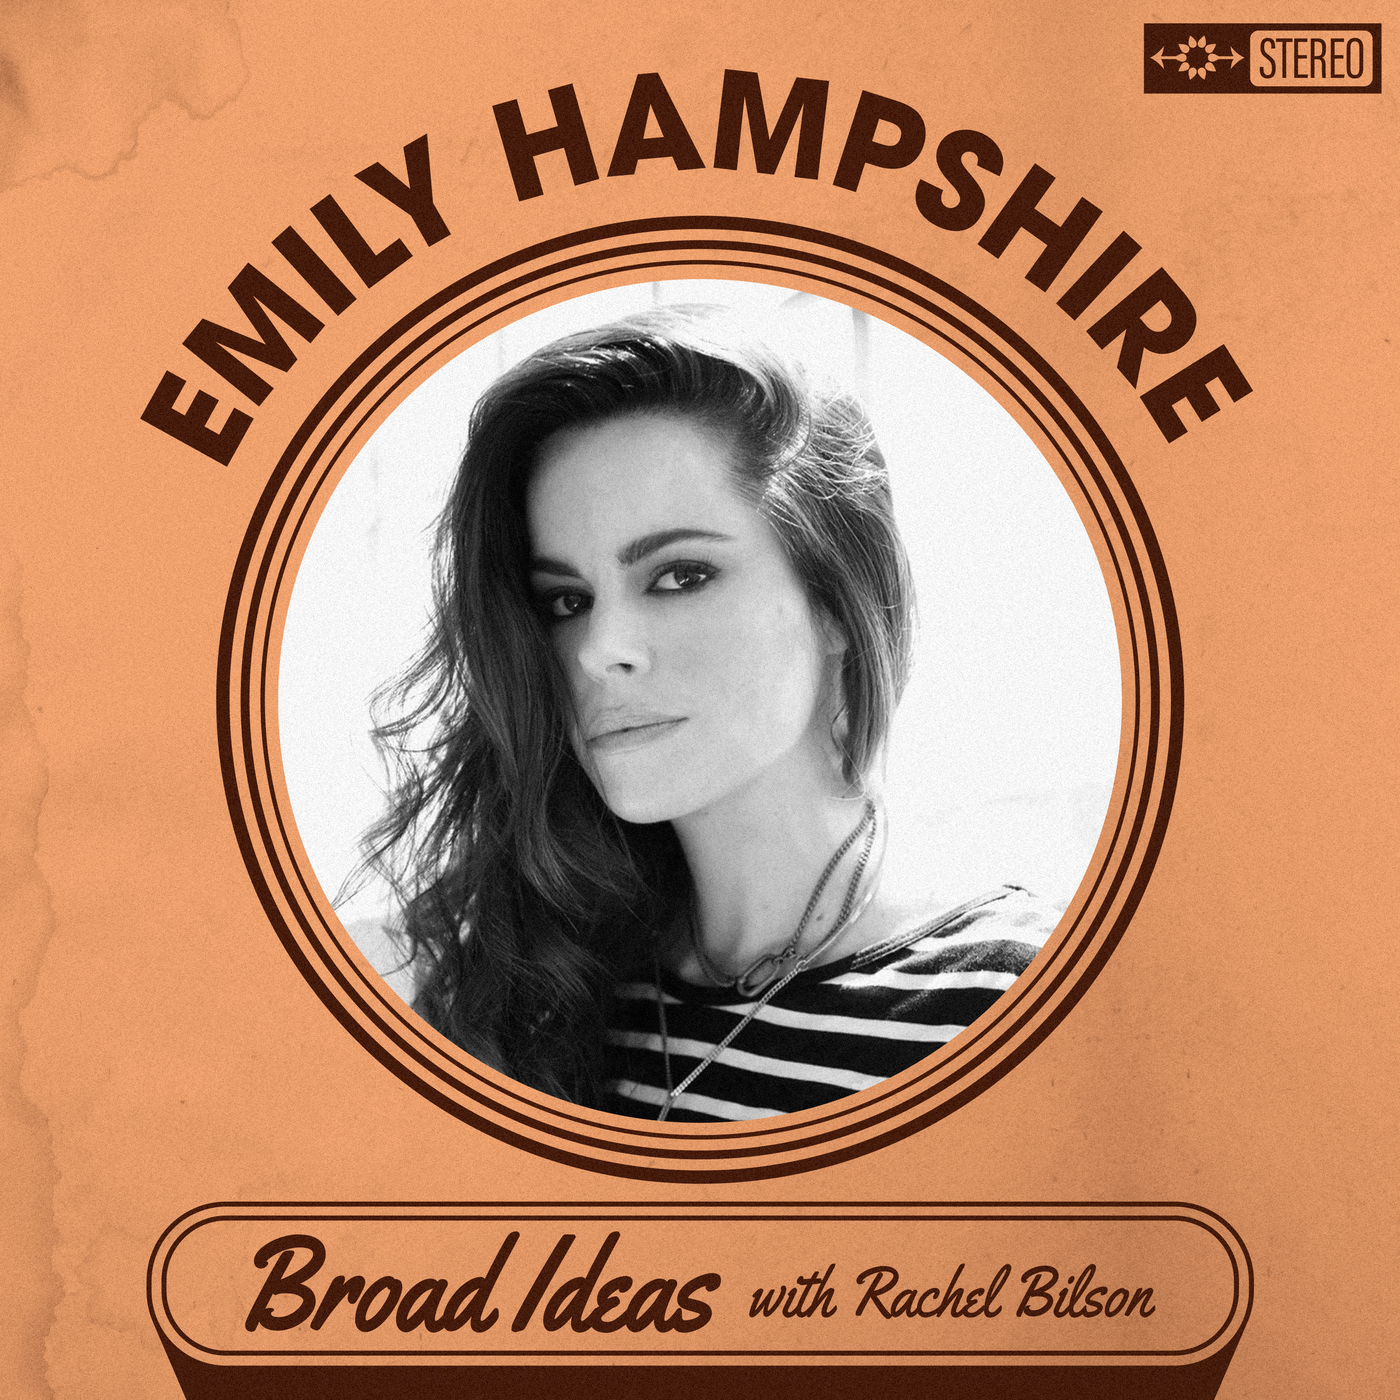 Emily Hampshire on Schitt’s Creek, Murder Houses, and Hypnotherapists